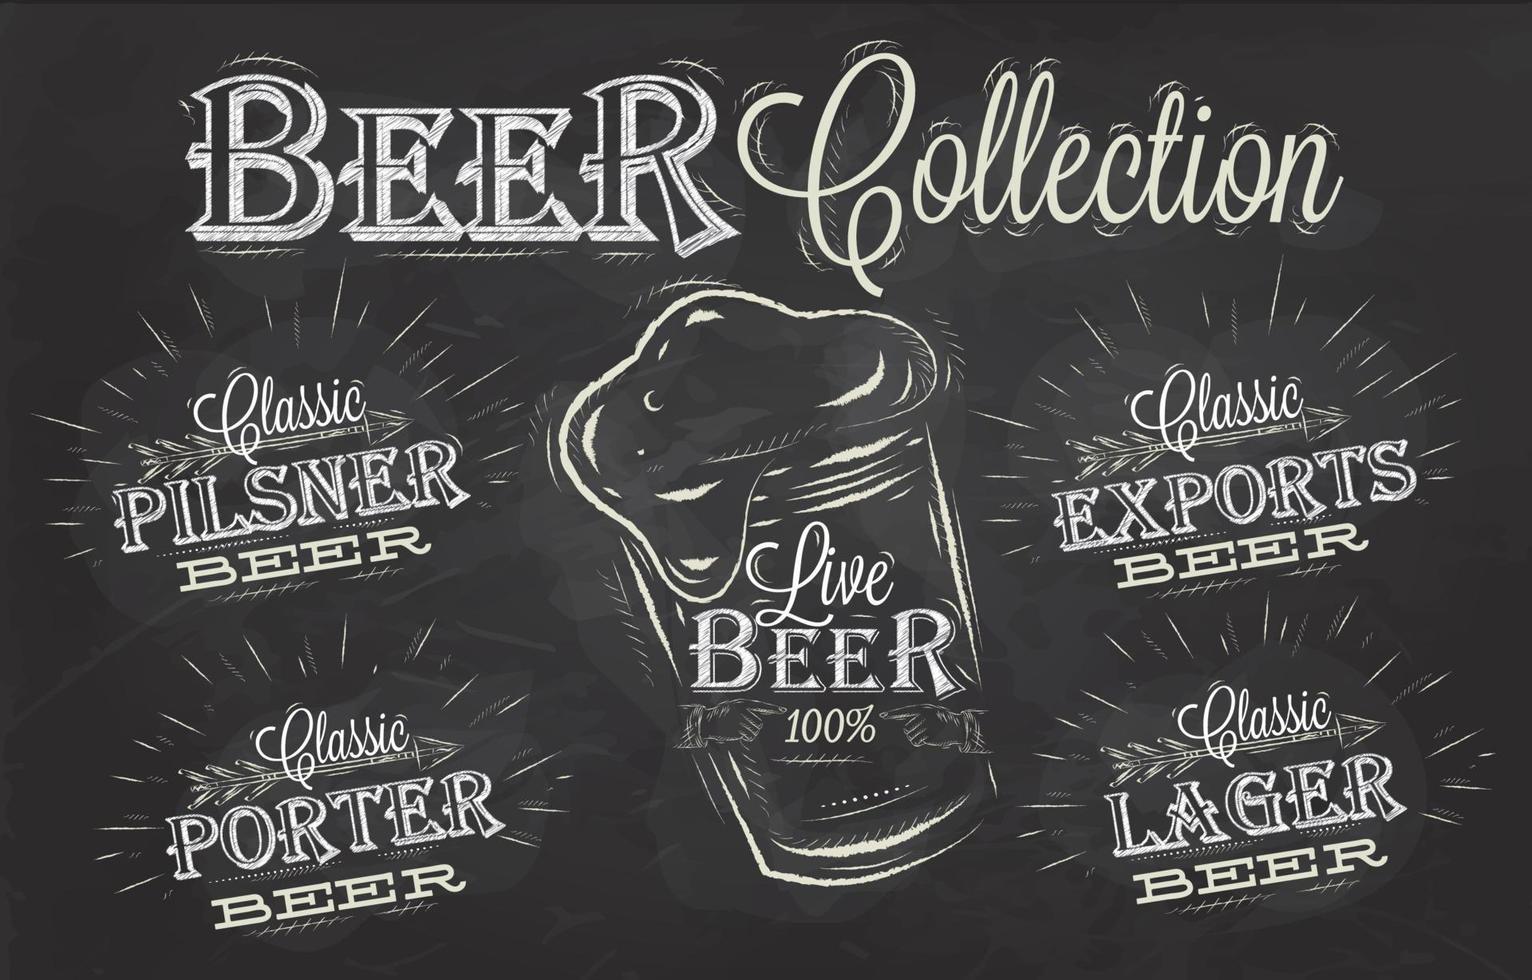 Names of different types of beer porter, exports, lager, live deer, pilsner, stylized drawing with chalk on blackboard vector